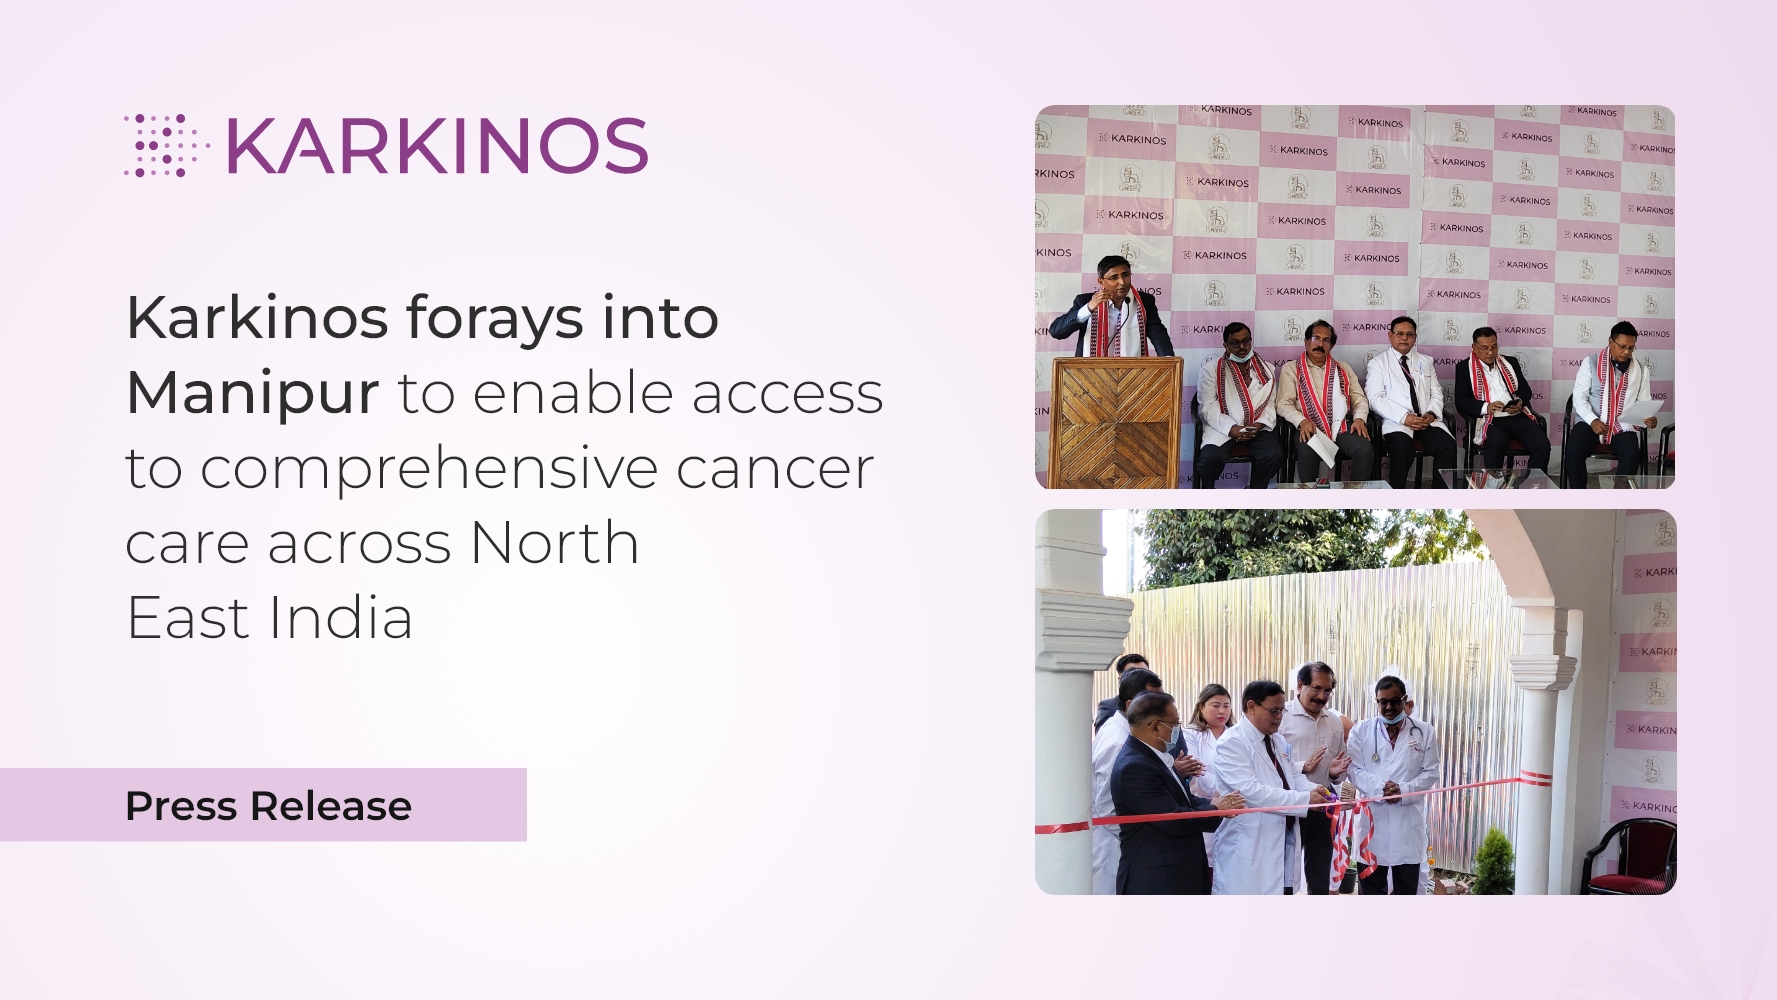 Karkinos Healthcare forays into Manipur to enable access to comprehensive cancer care across North East India